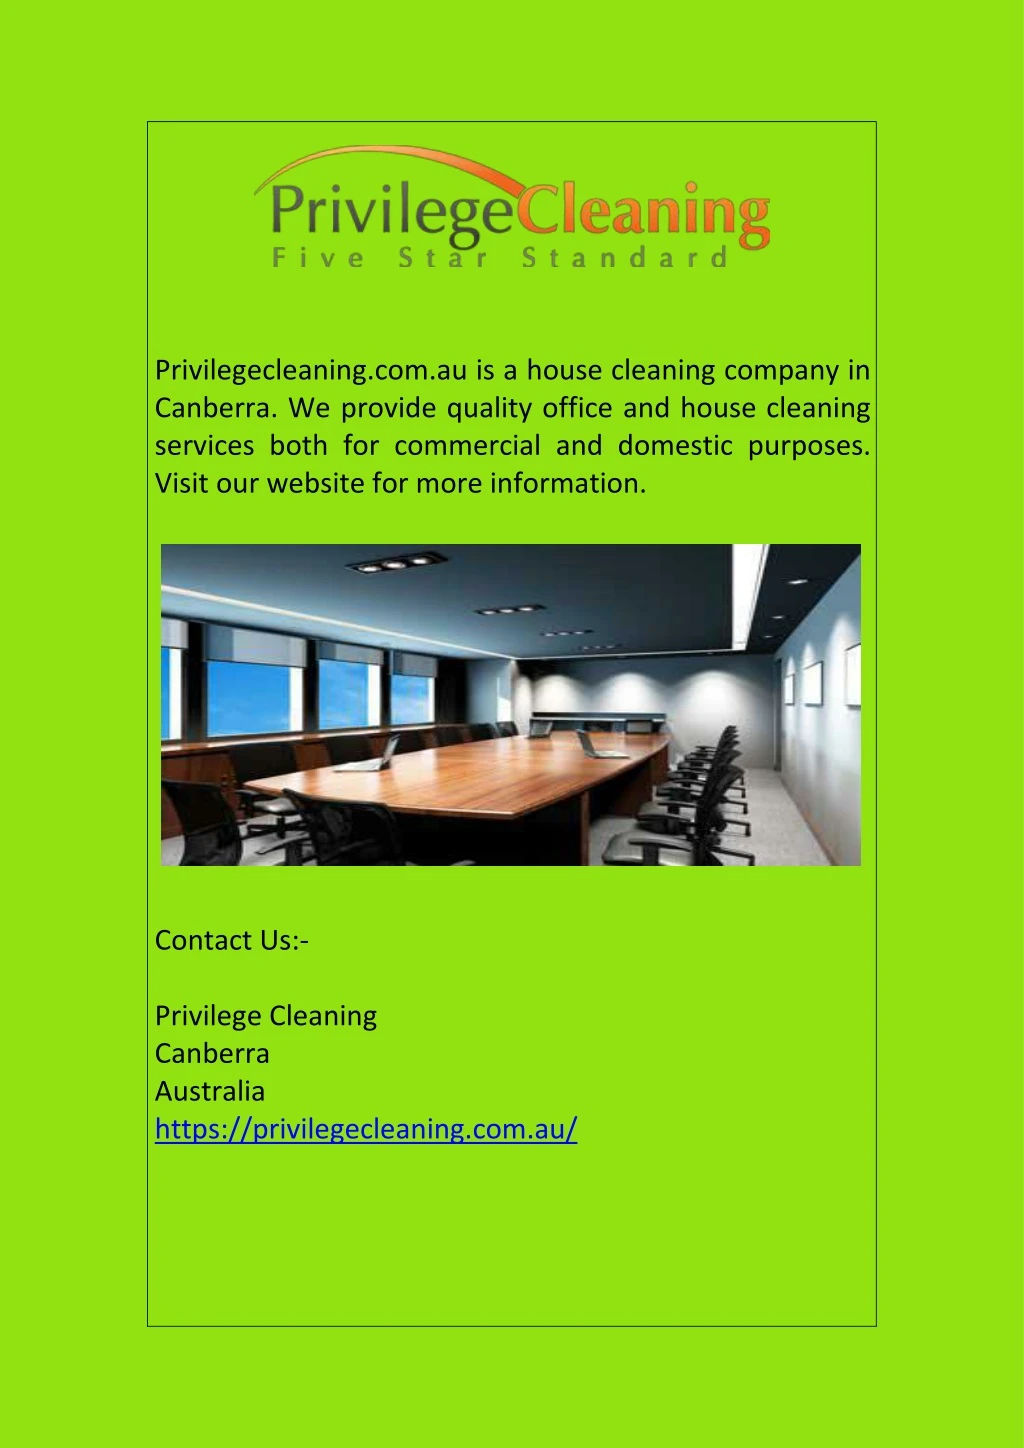 privilegecleaning com au is a house cleaning